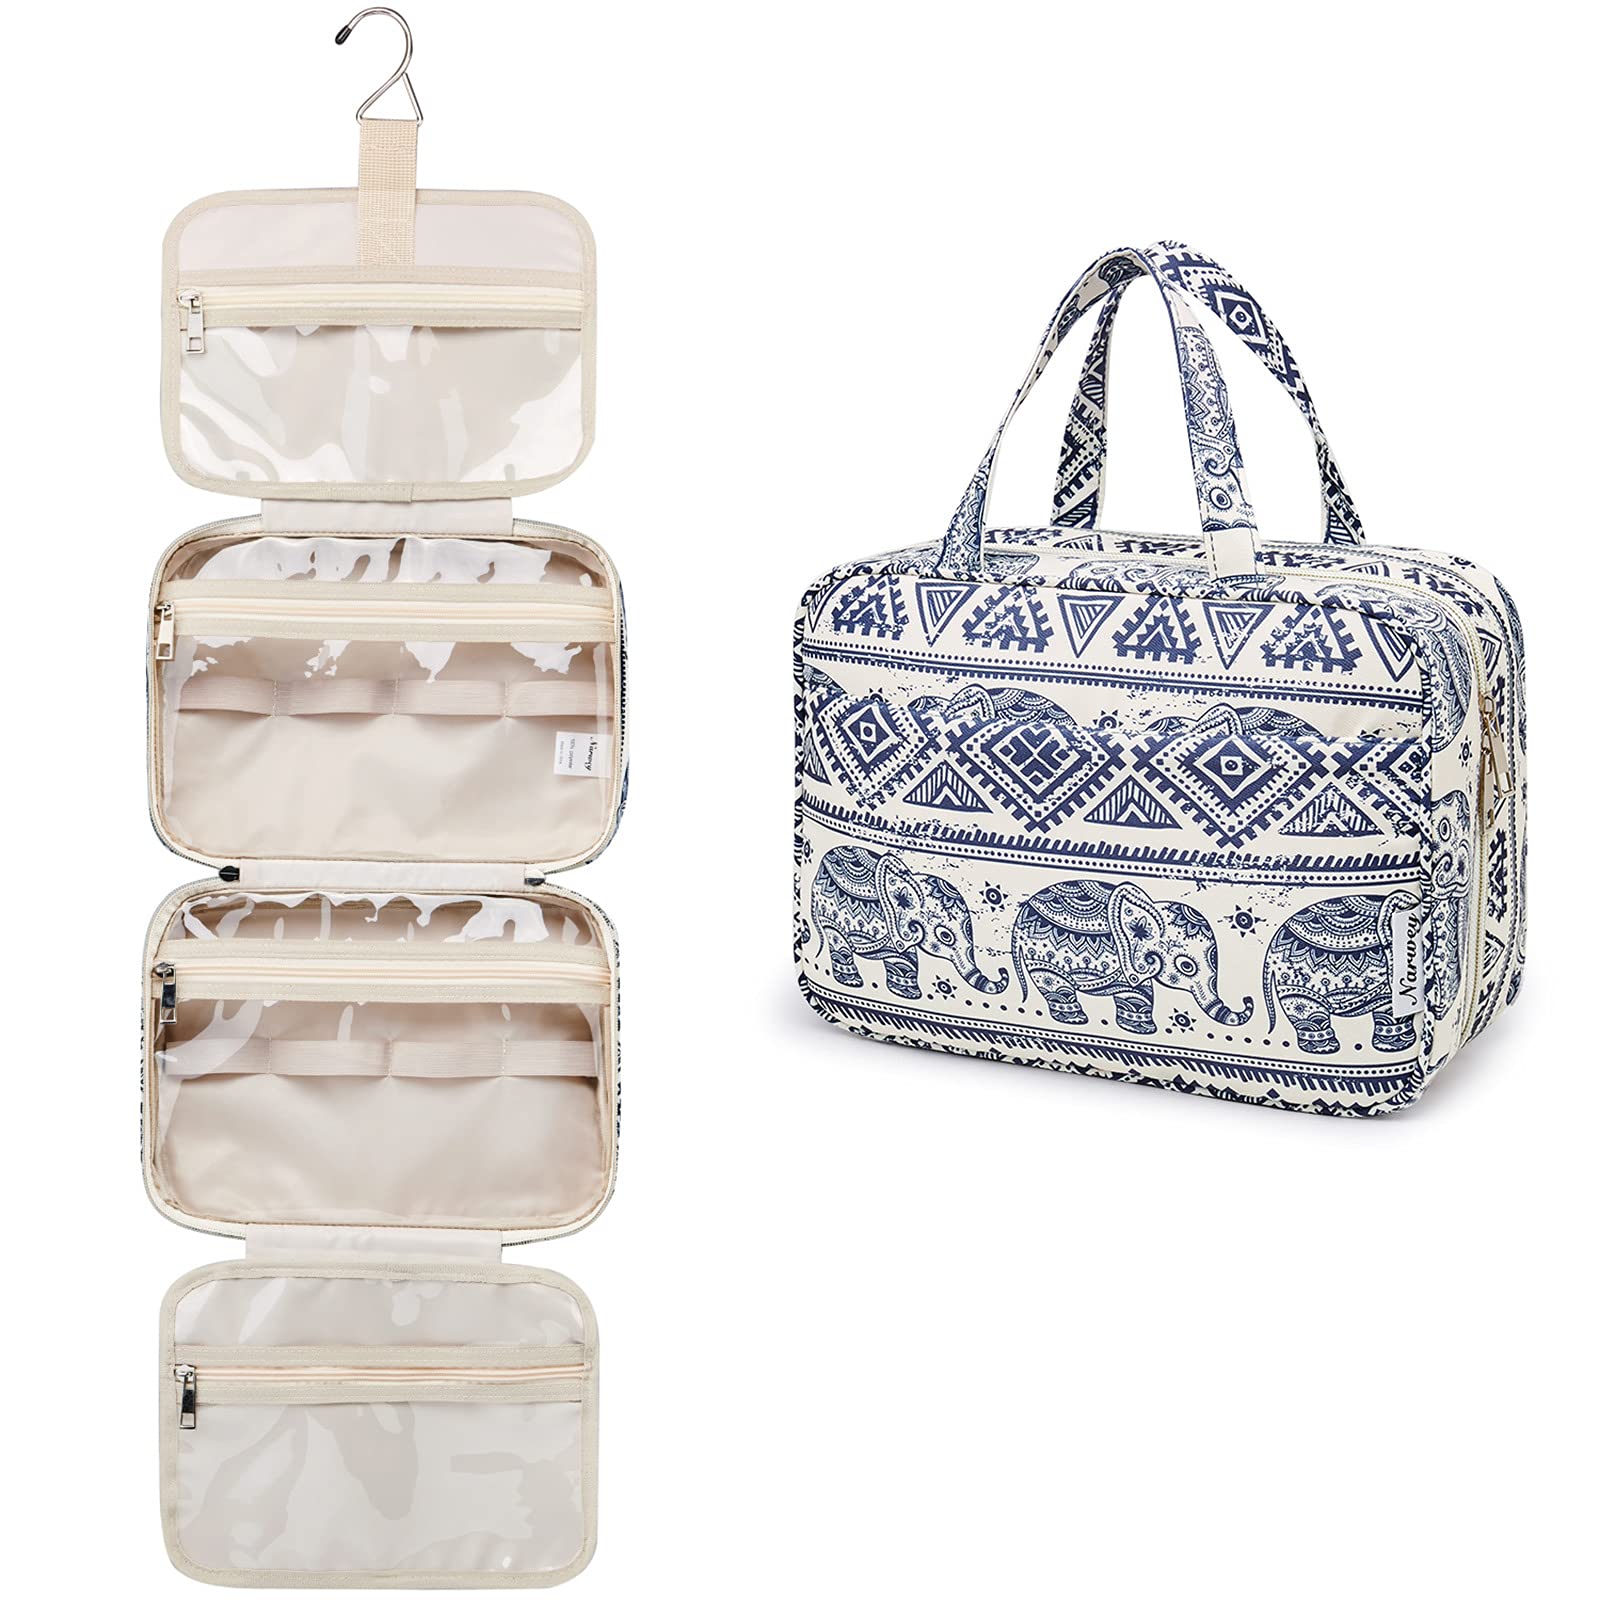 AAA.com l Travelon Compact Hanging Toiletry Kit